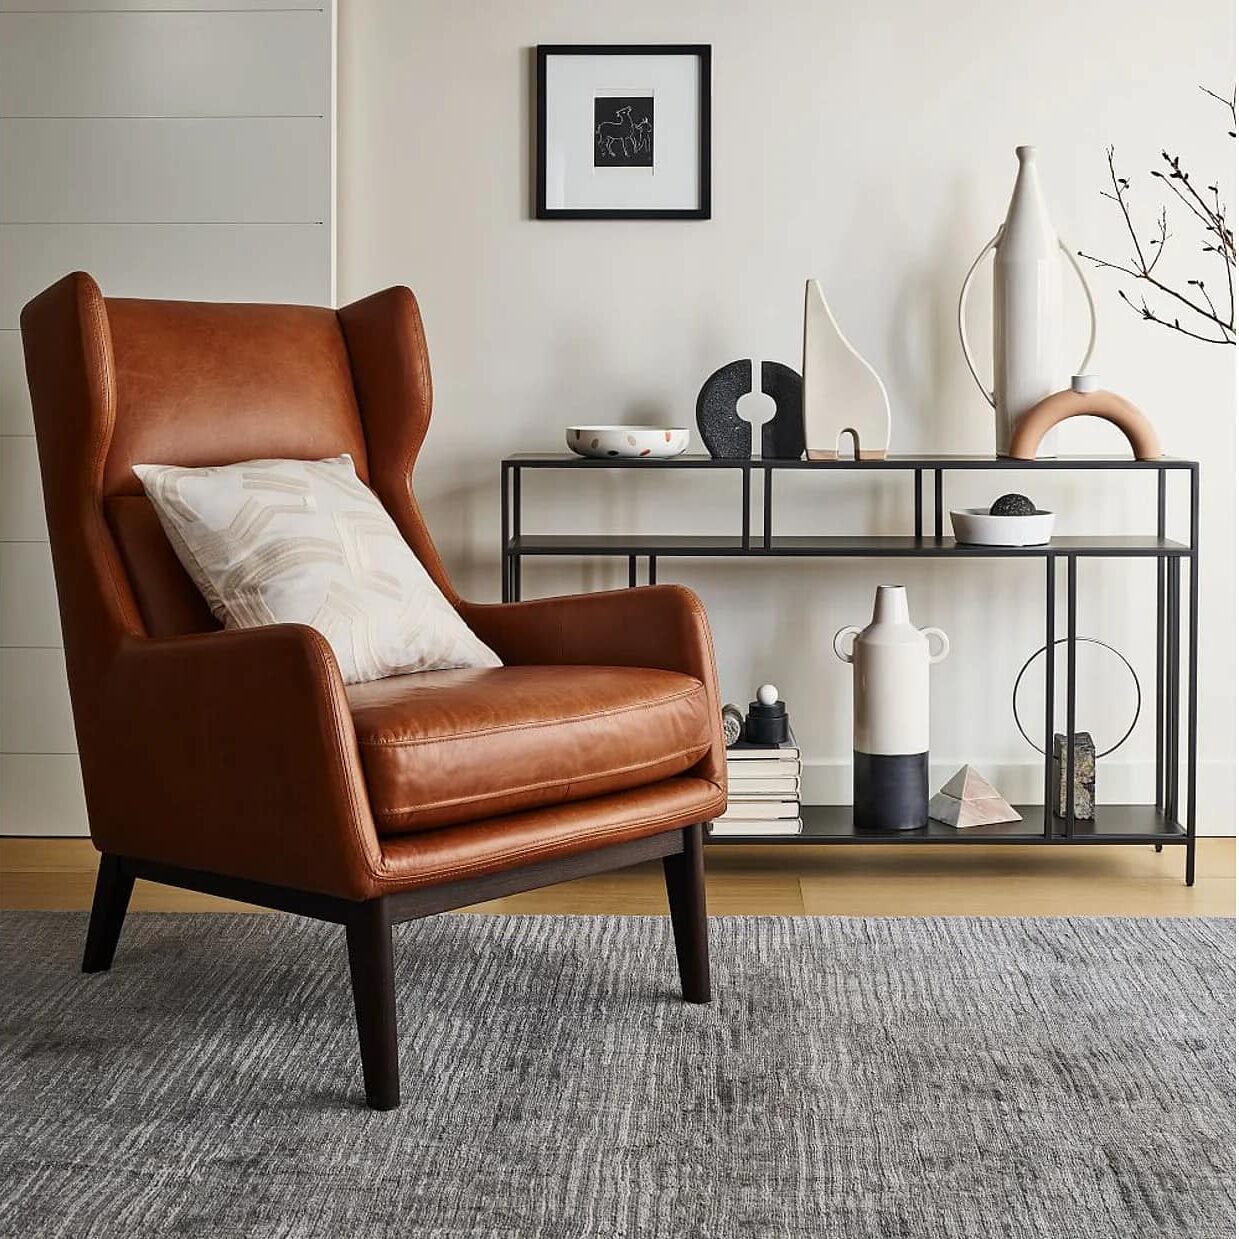 club chair made of leather, carpet placed on floor, side table, beautiful living room